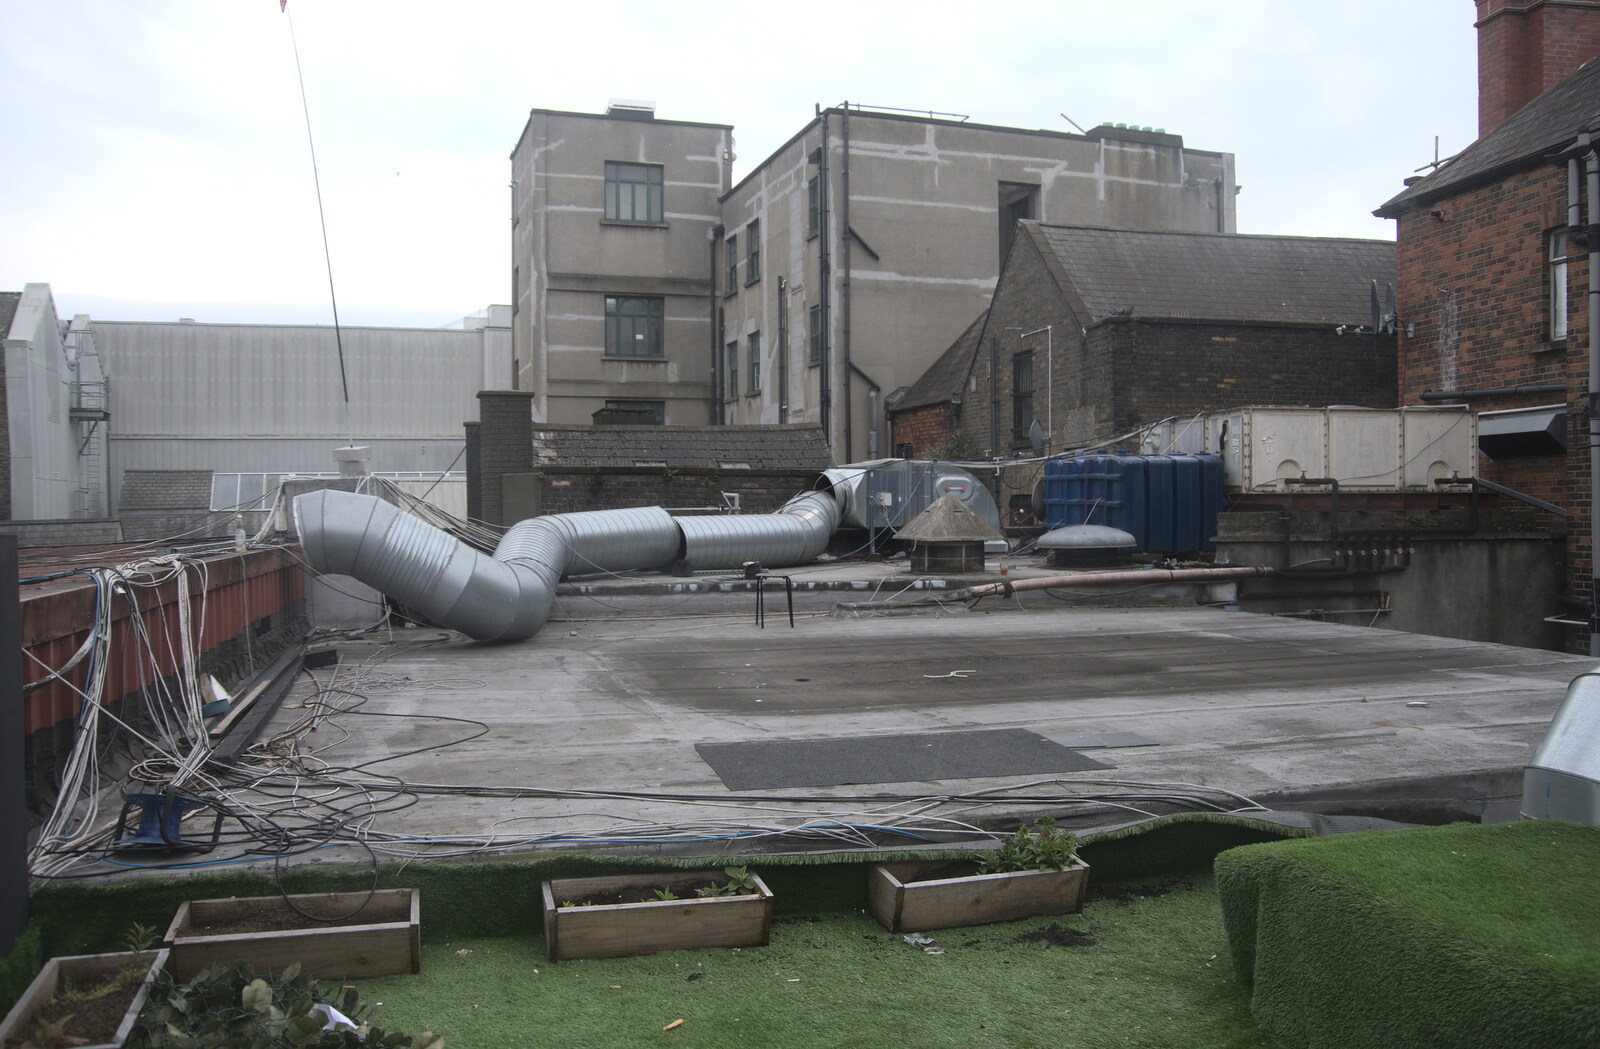 Blackrock North and South, Louth and County Dublin, Ireland - 23rd April 2022: A view from the roof of the bar